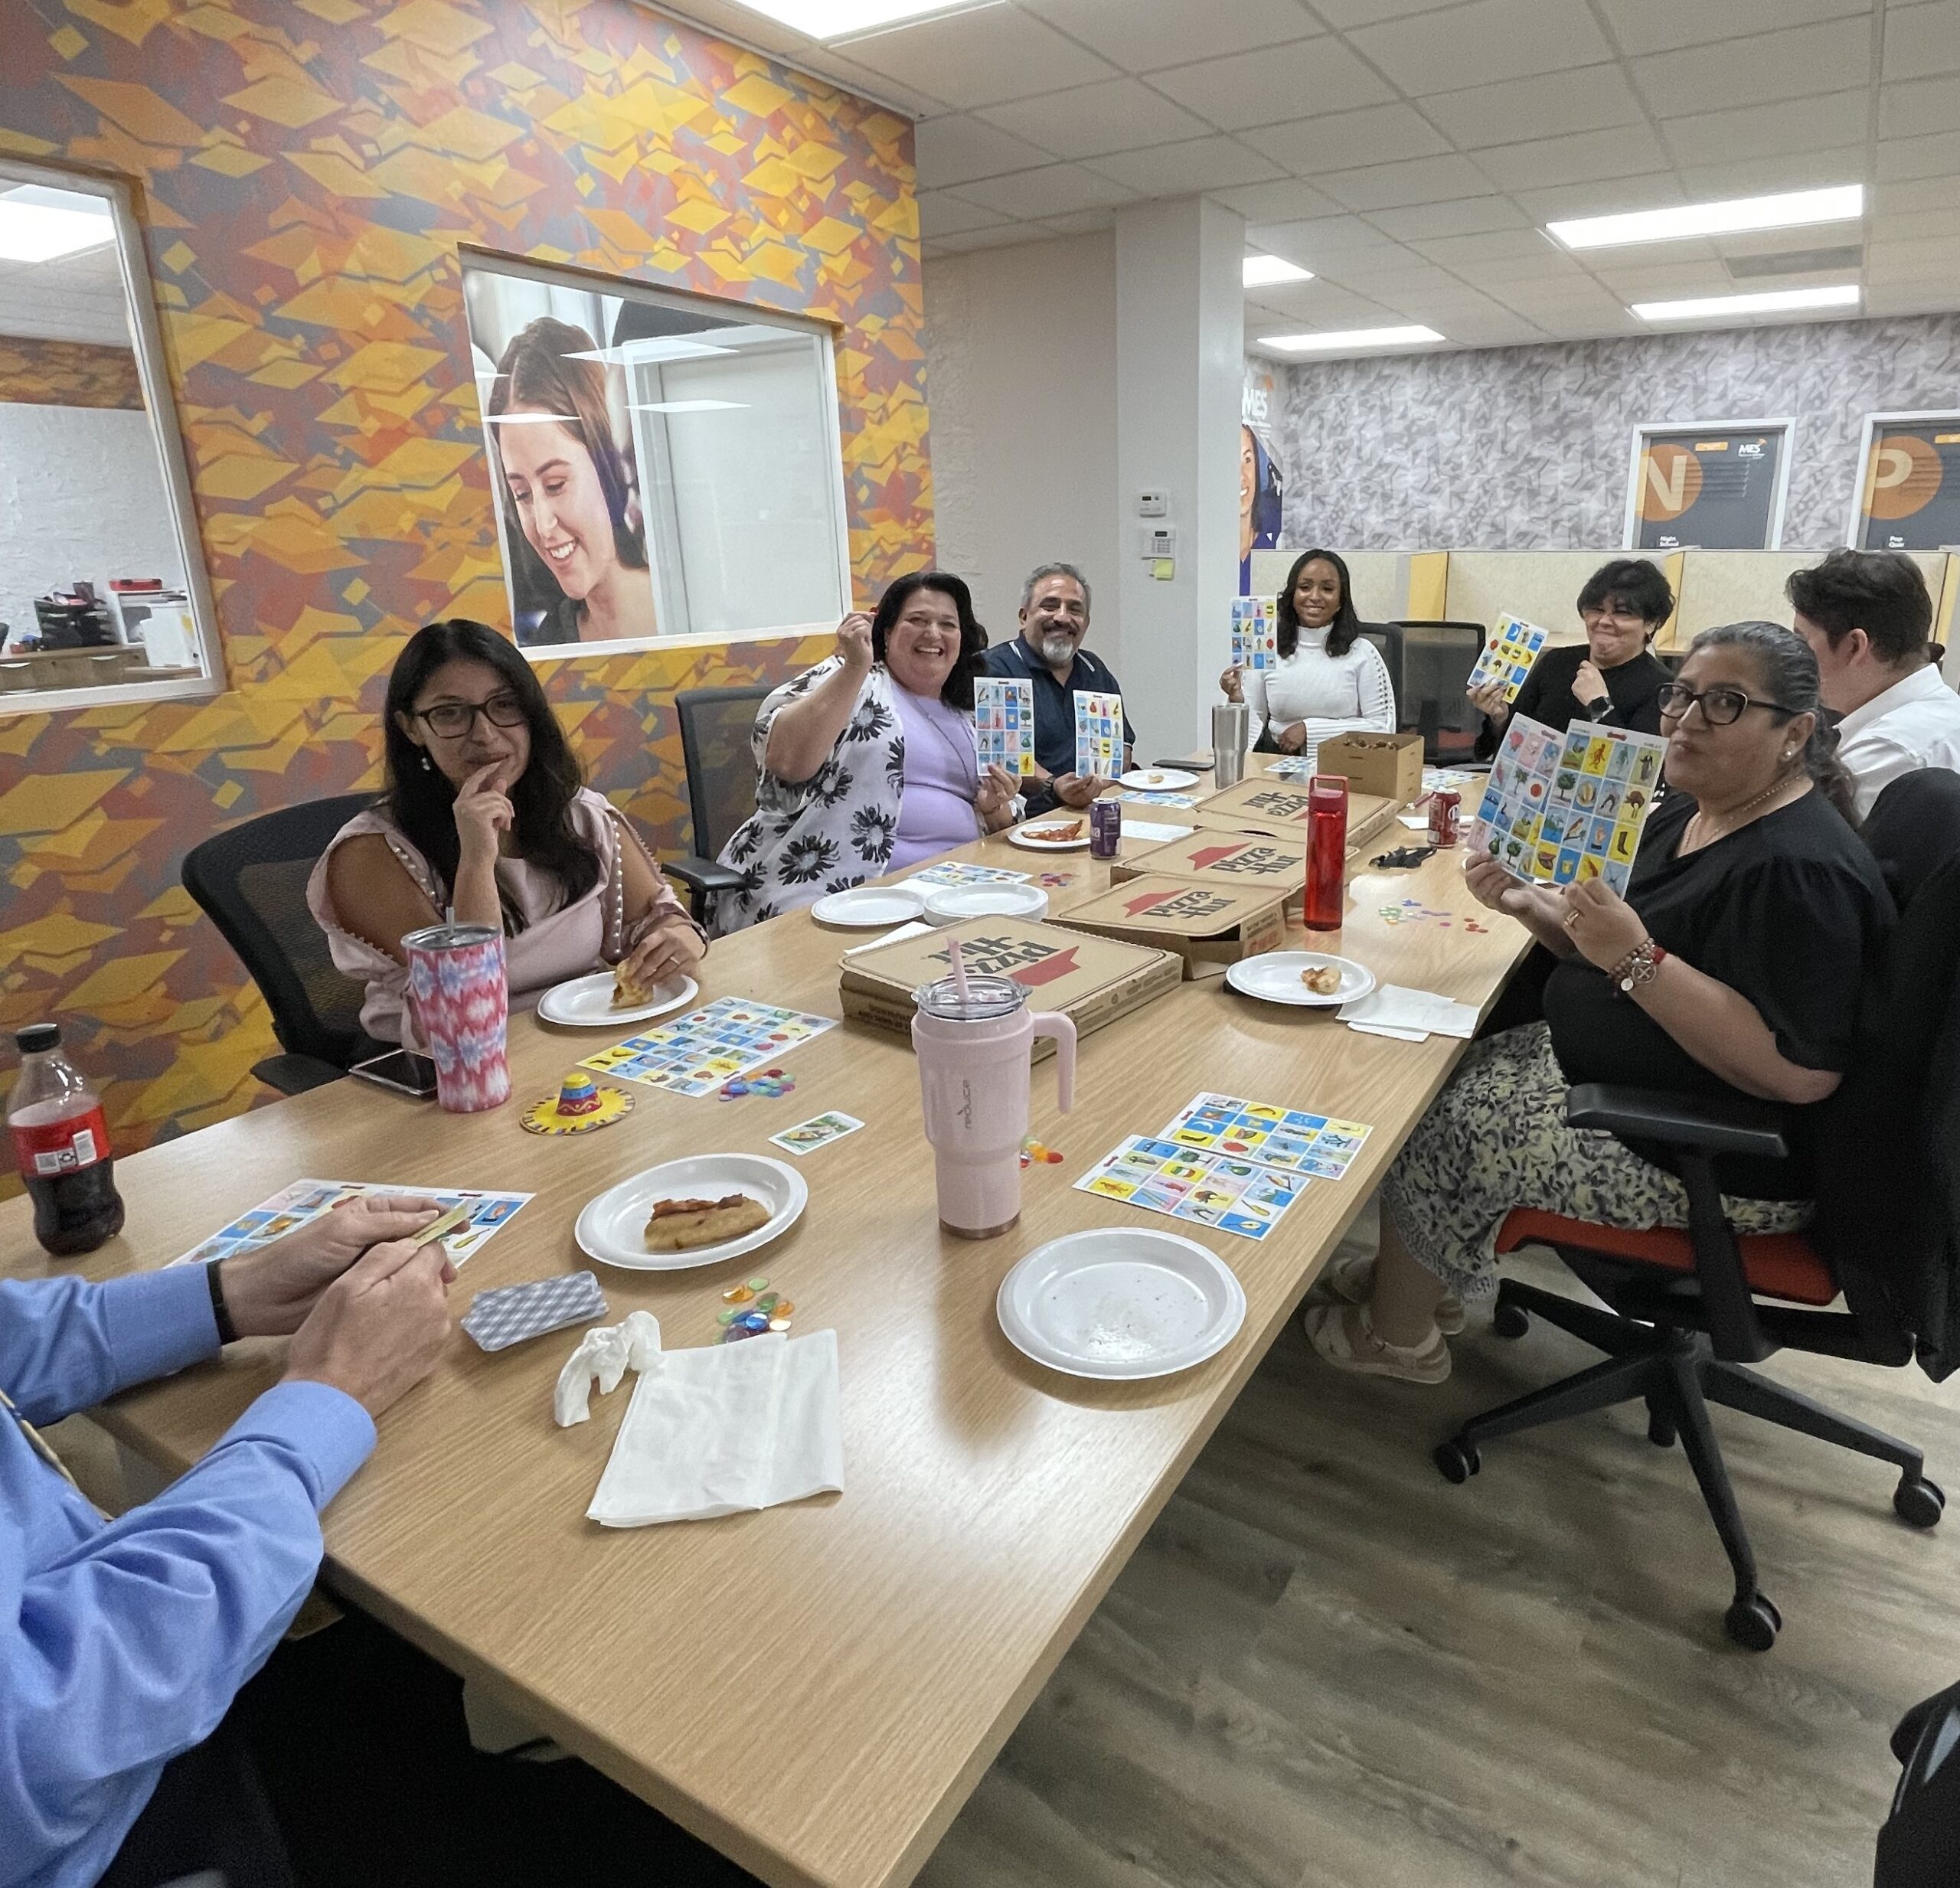 My Education Solutions employees enjoy a break with lunch from Pizza Hut and a game of Loteria